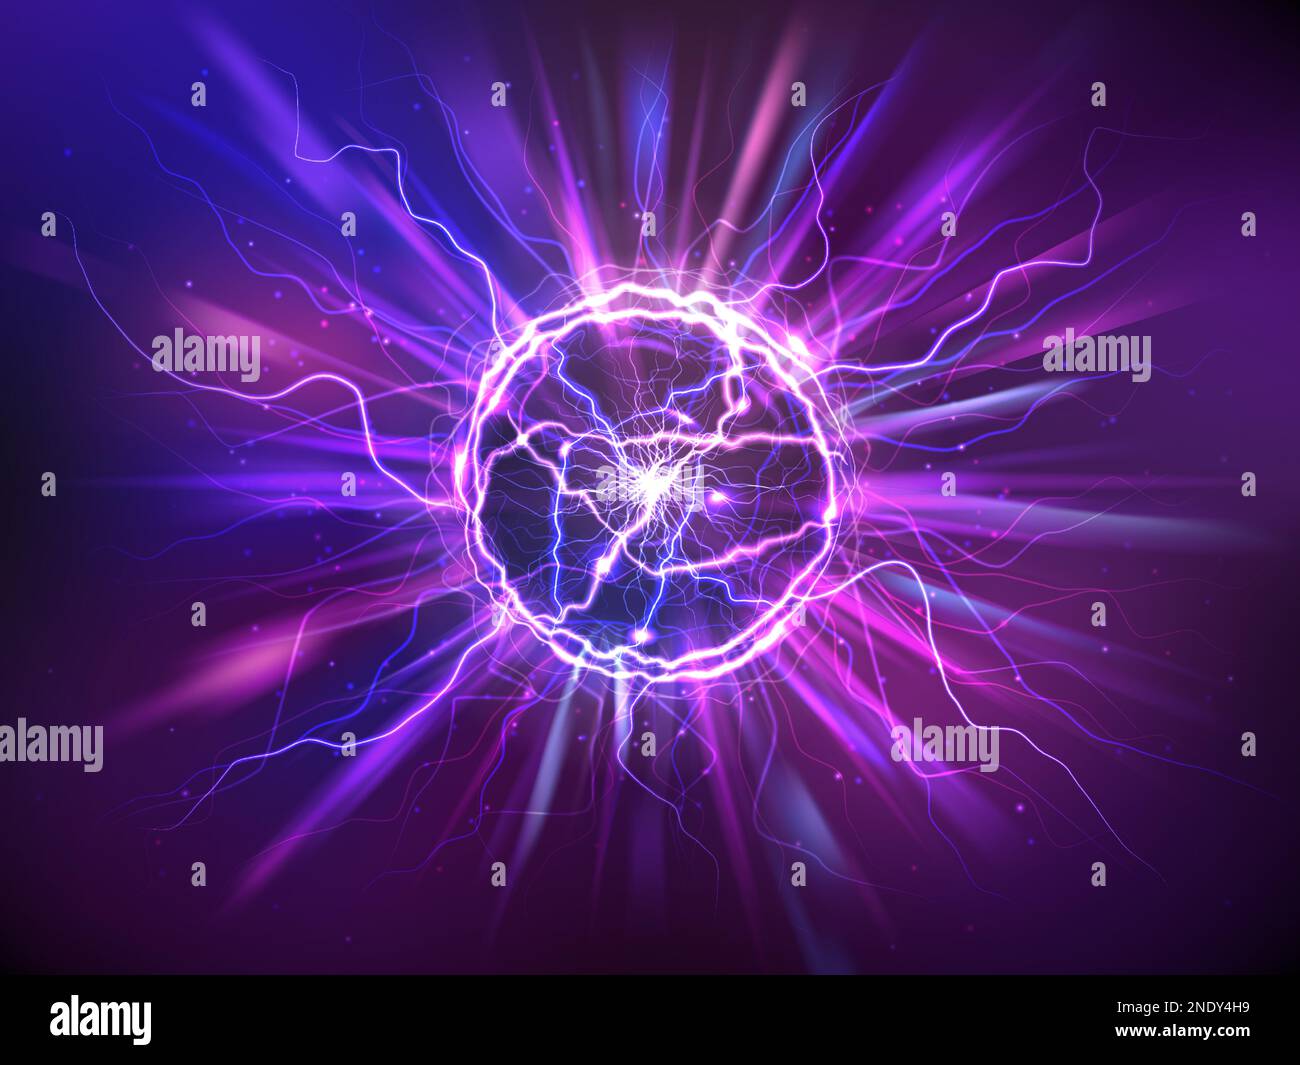 Electric ball or plasma sphere with rays, realistic vector illustration. Abstractt ball lightning with burning flash or powerful electric discharges isolated at night background. Magical energy design Stock Vector